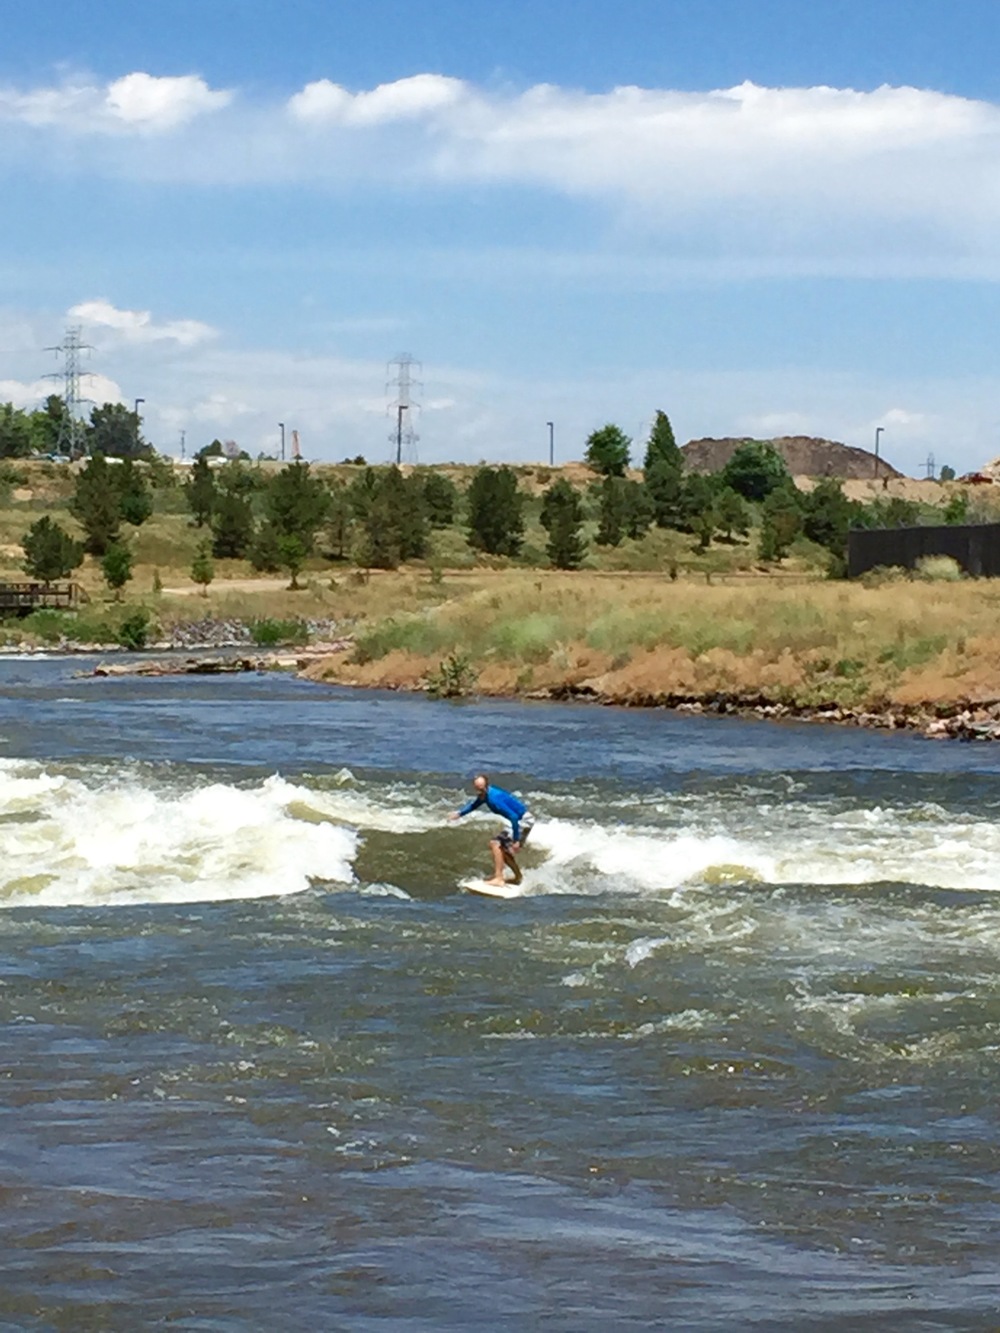  No-coast surfing at the Union Chutes; Denver has it all 